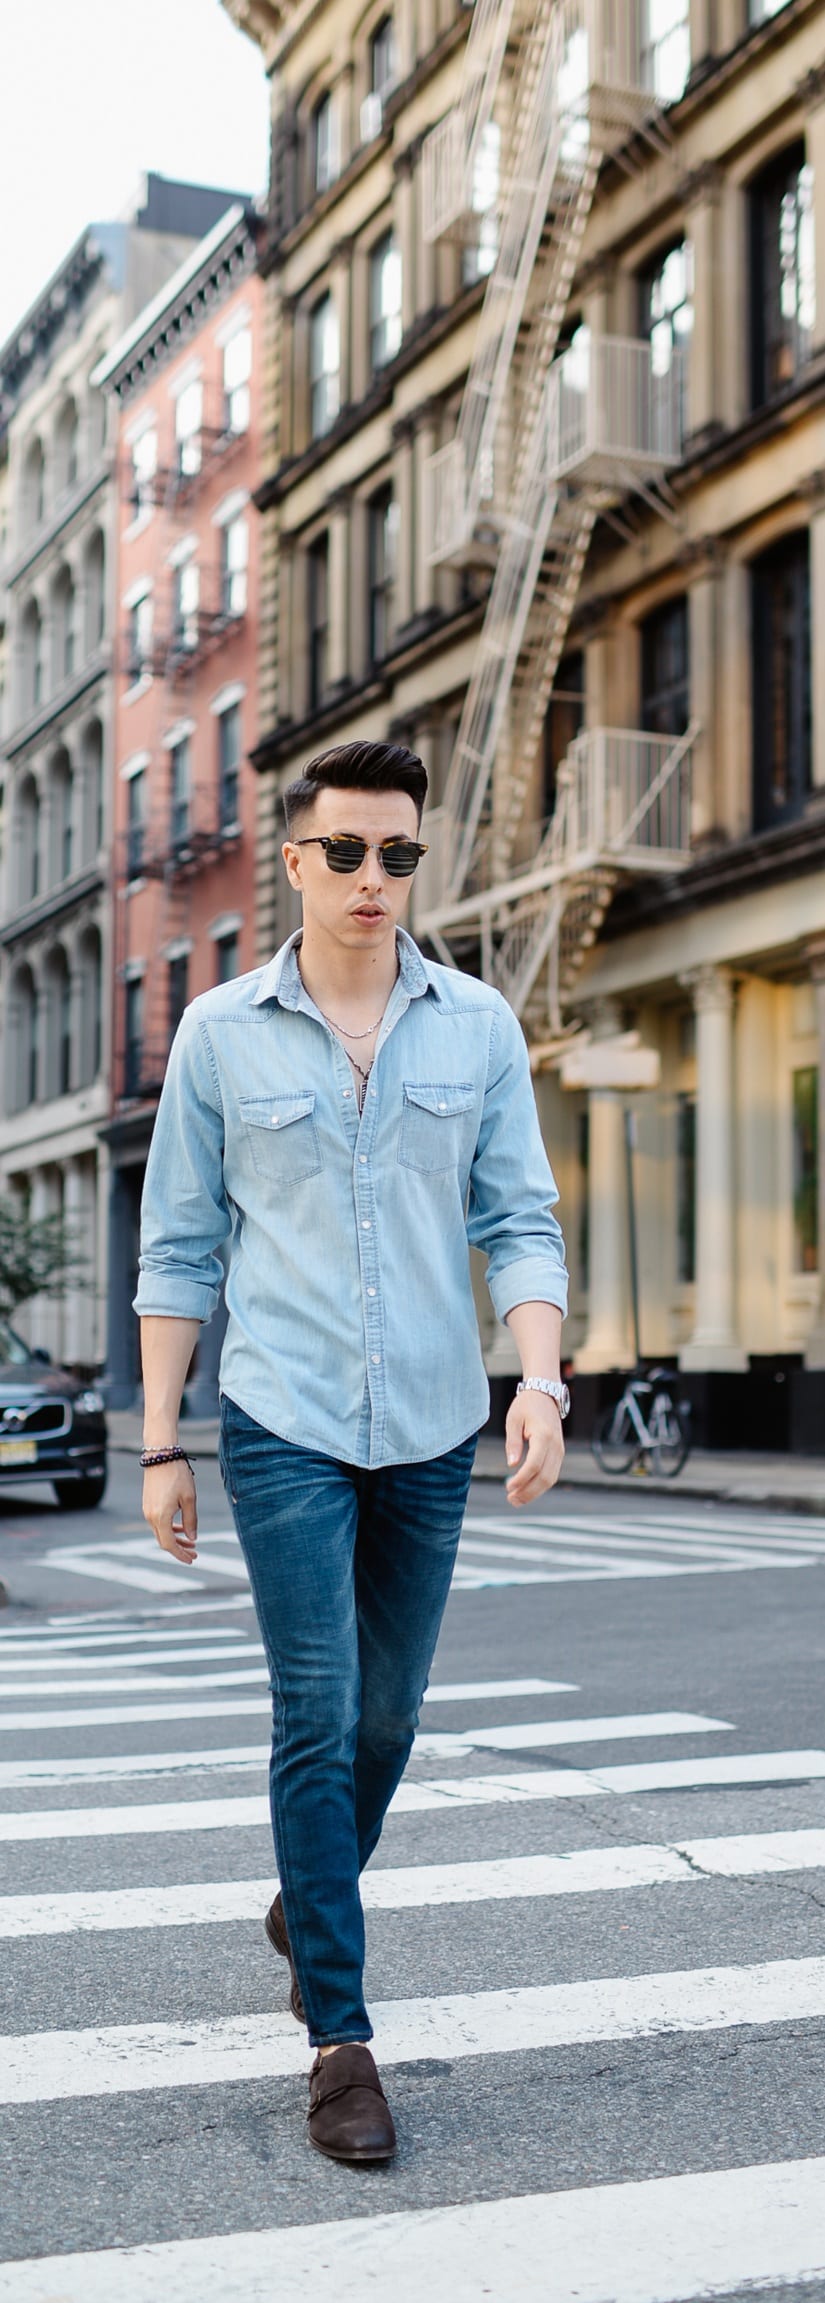 American Casual Outfit Ideas For Guys